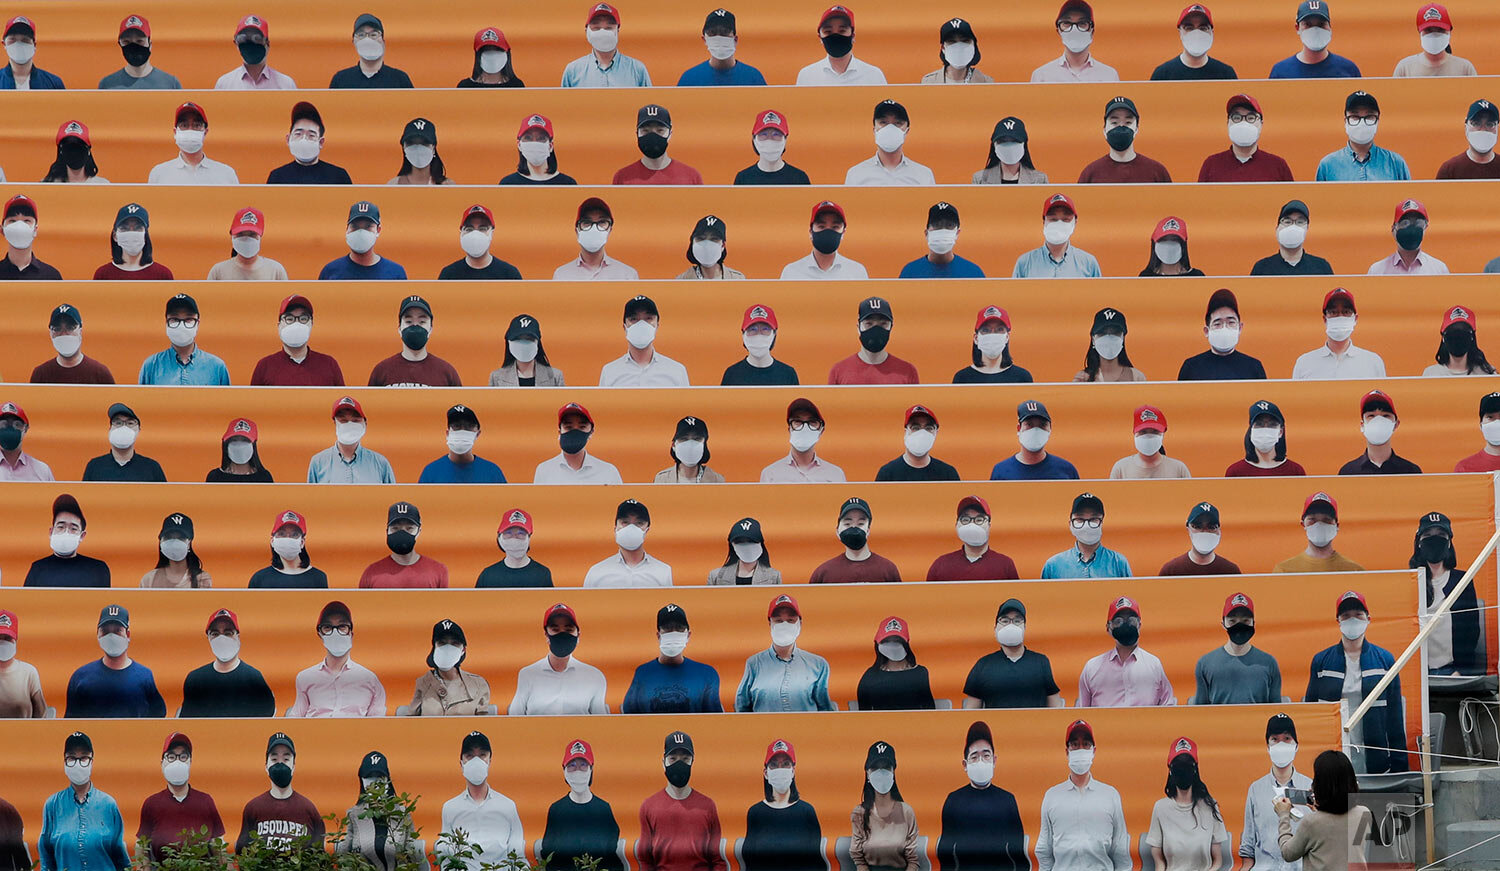  A woman holds her smartphone in front of the spectators' seats which are covered with pictures of fans, before the start of a baseball game between Hanwha Eagles and SK Wyverns in Incheon, South Korea, Tuesday, May 5, 2020. (AP Photo/Lee Jin-man) 